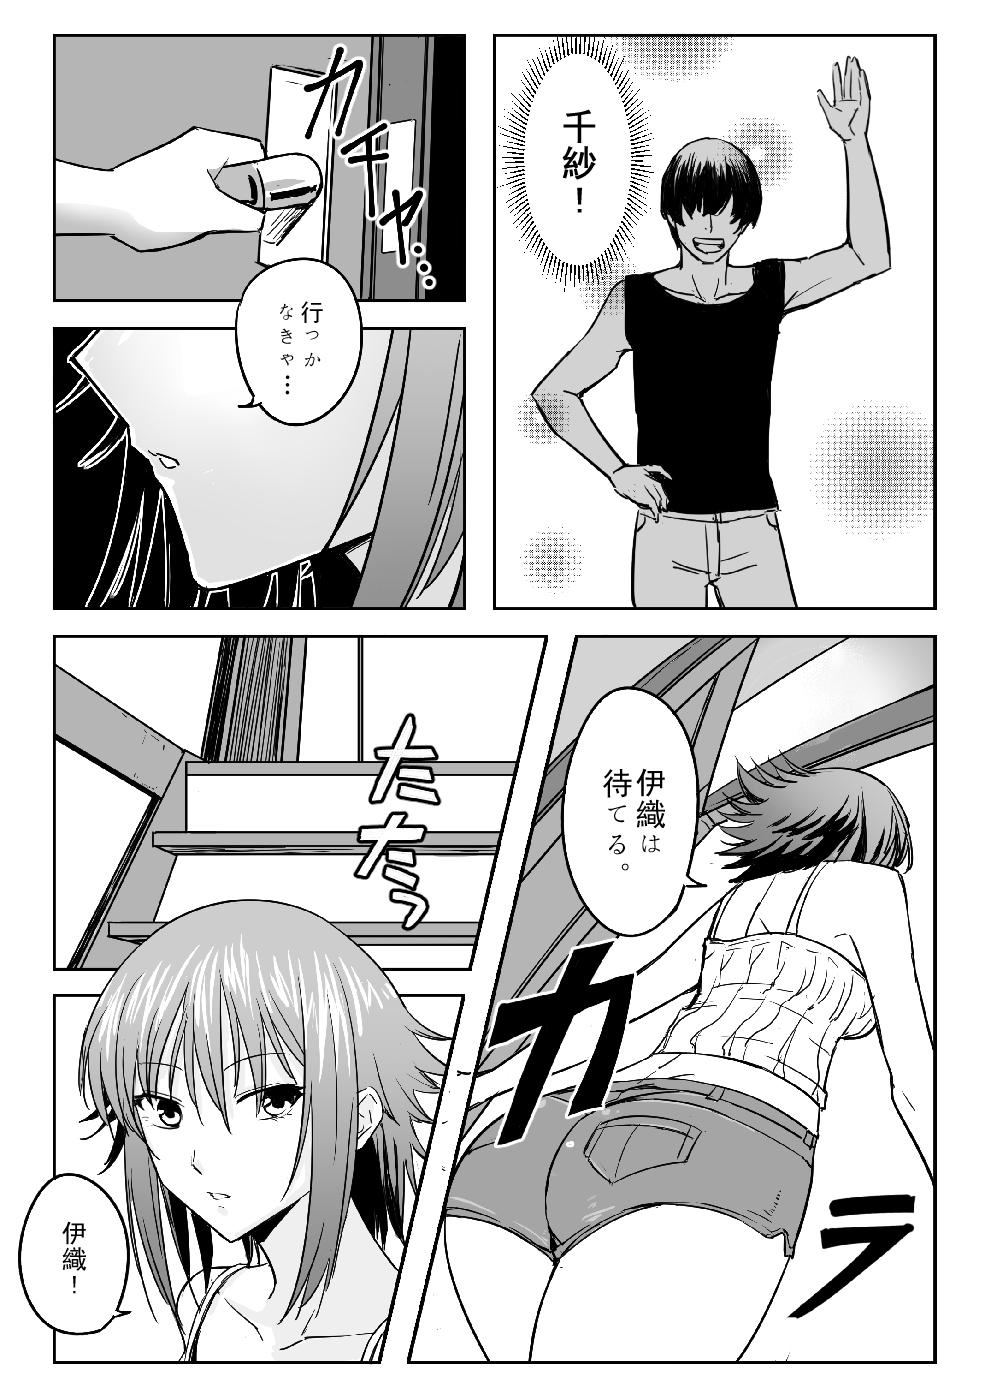 Nudity Chika-chan is a goodbye! - Grand blue Girl Fuck - Page 5